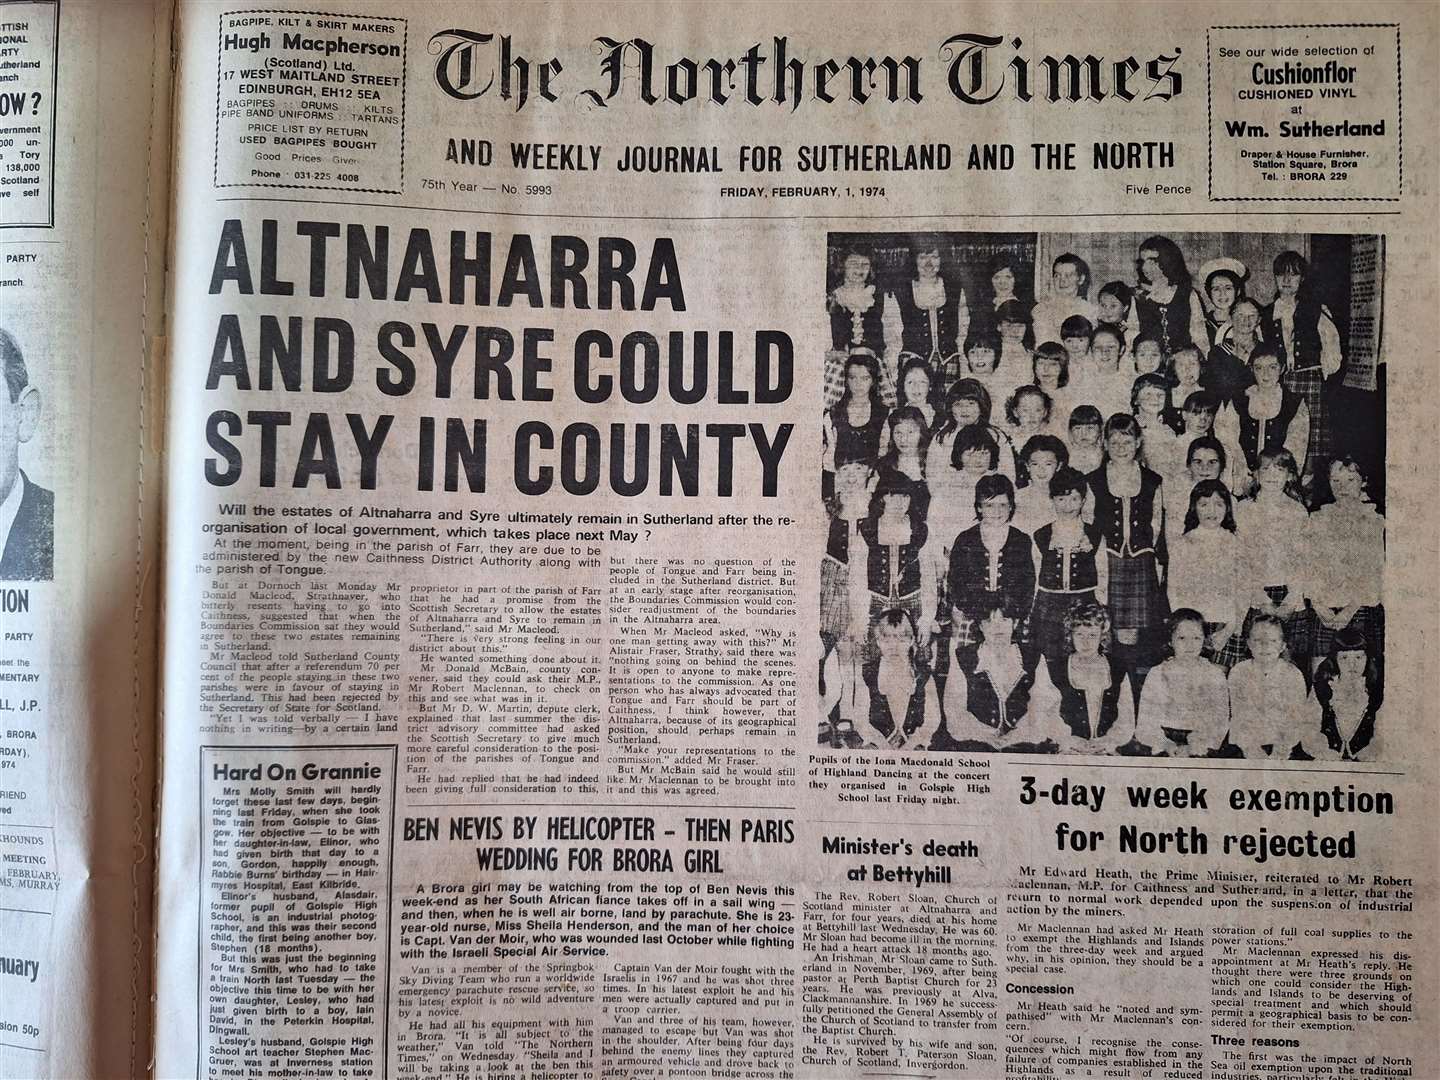 The edition of February 1, 1974.